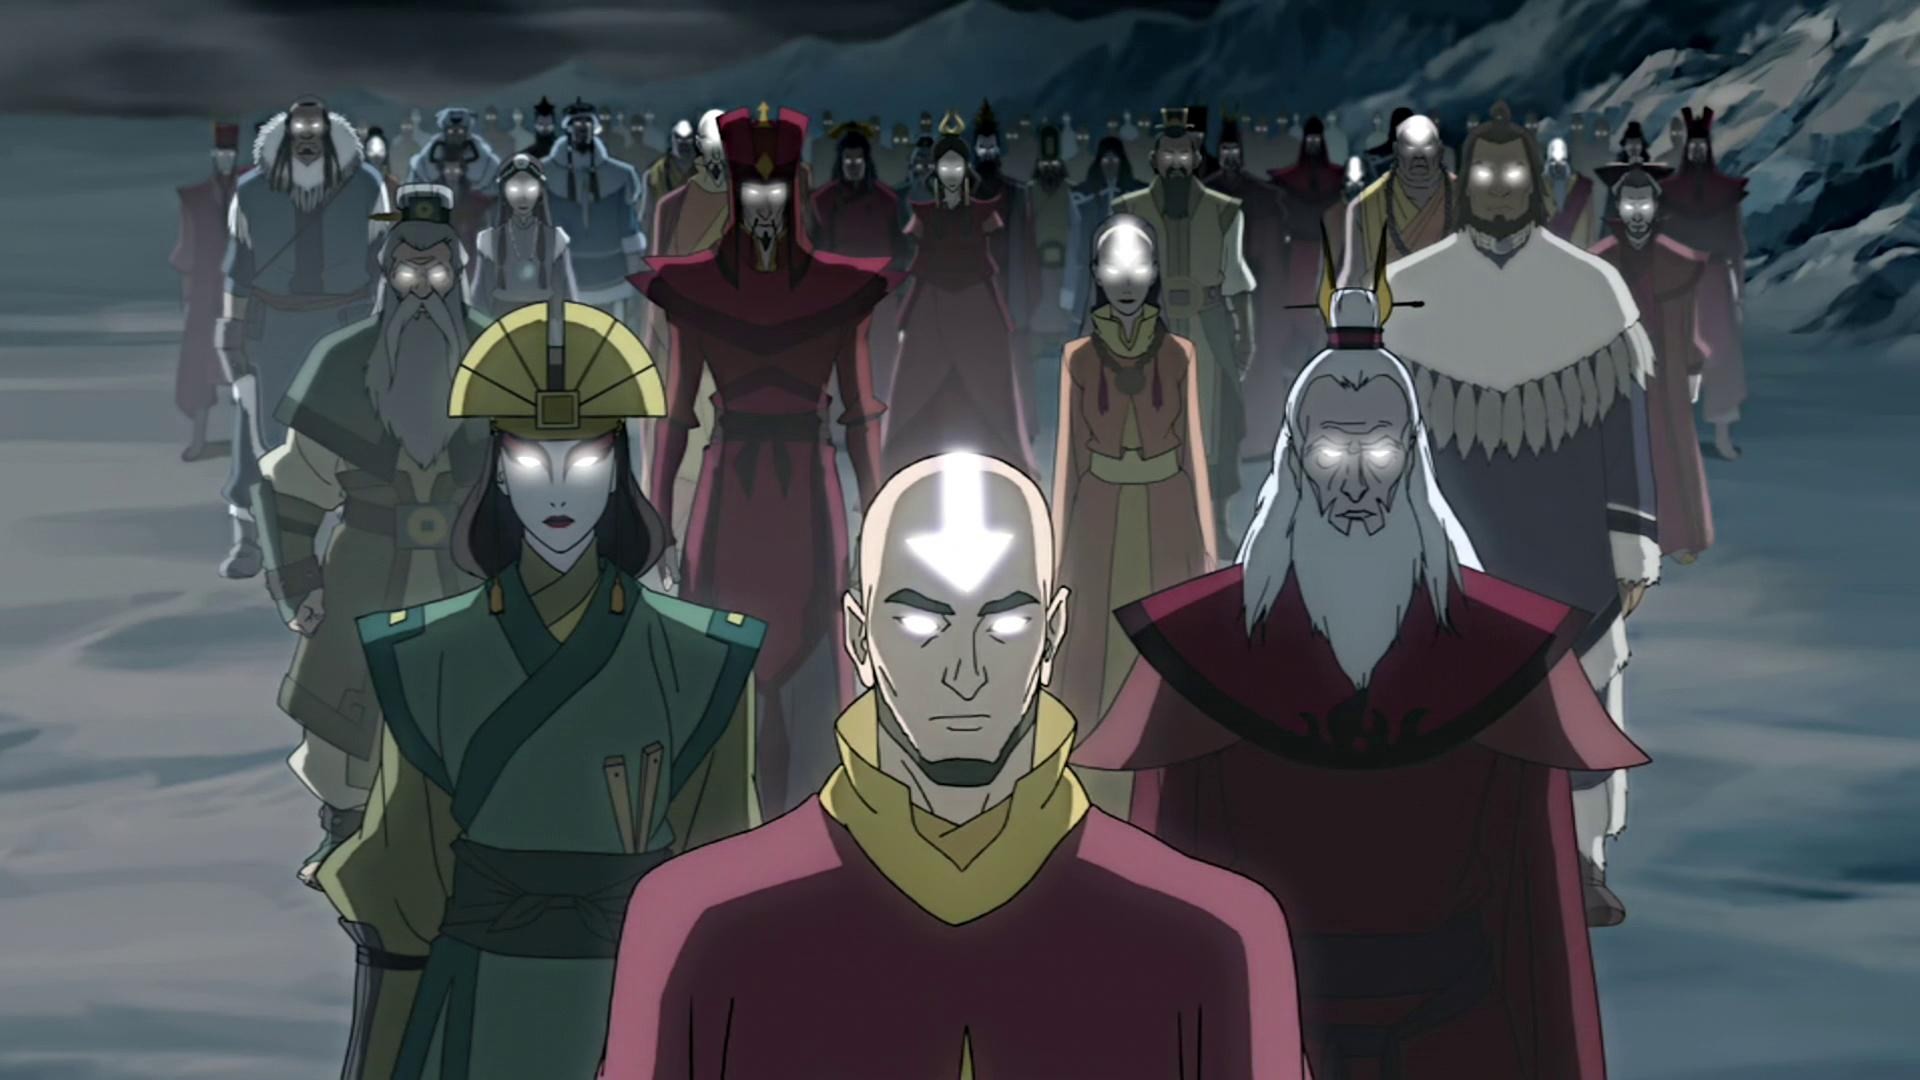 1920x1080  Free Awesome avatar the last airbender